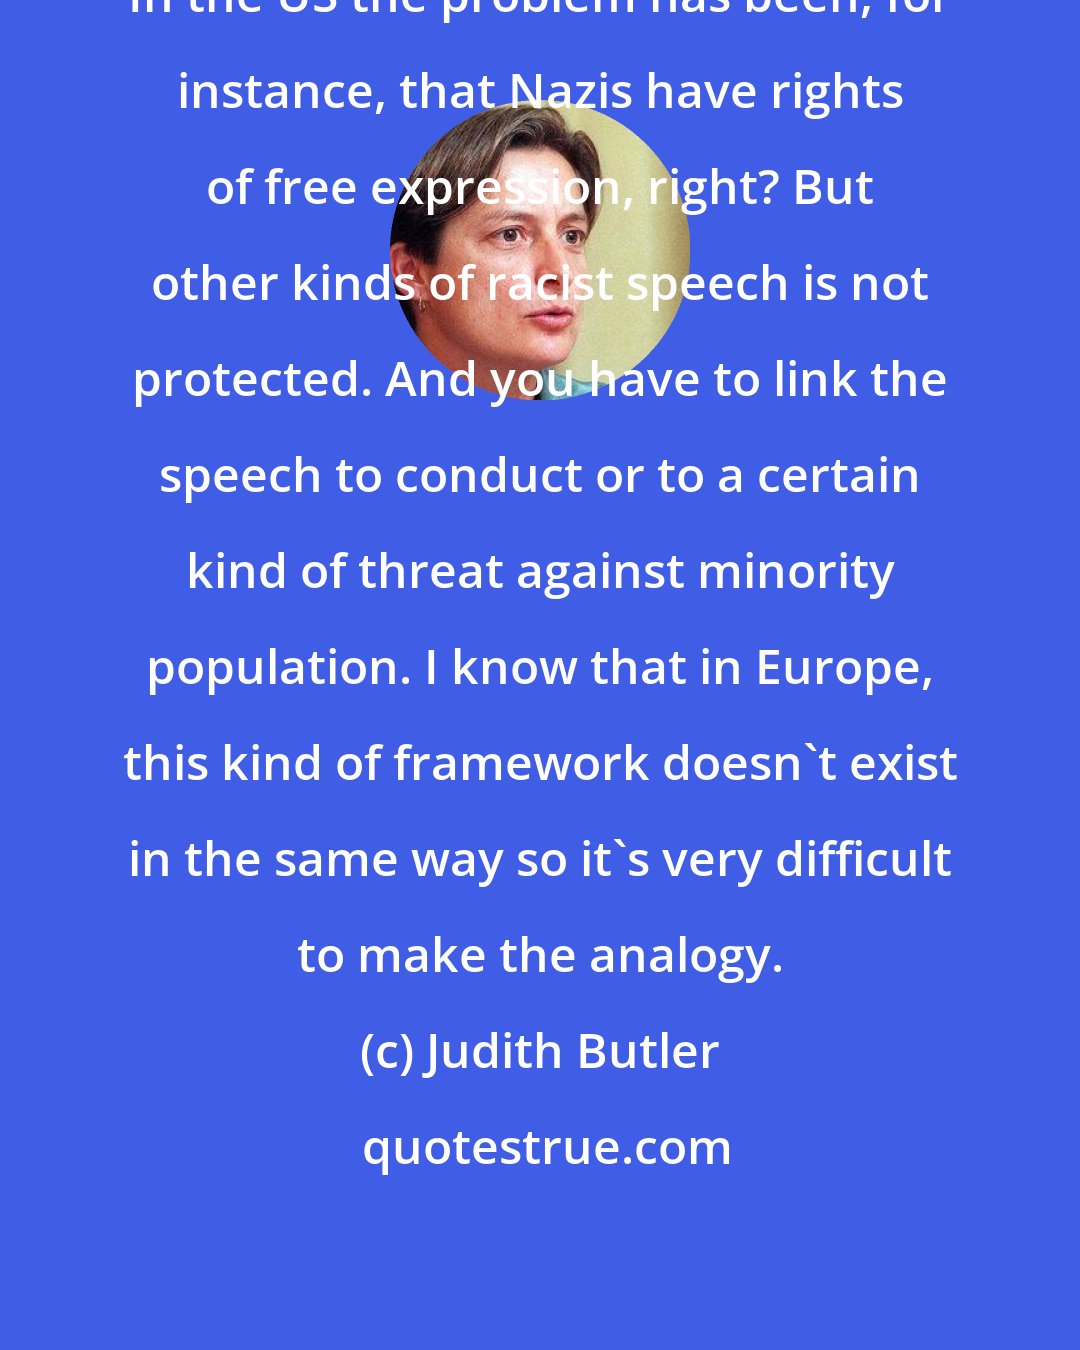 Judith Butler: In the US the problem has been, for instance, that Nazis have rights of free expression, right? But other kinds of racist speech is not protected. And you have to link the speech to conduct or to a certain kind of threat against minority population. I know that in Europe, this kind of framework doesn't exist in the same way so it's very difficult to make the analogy.